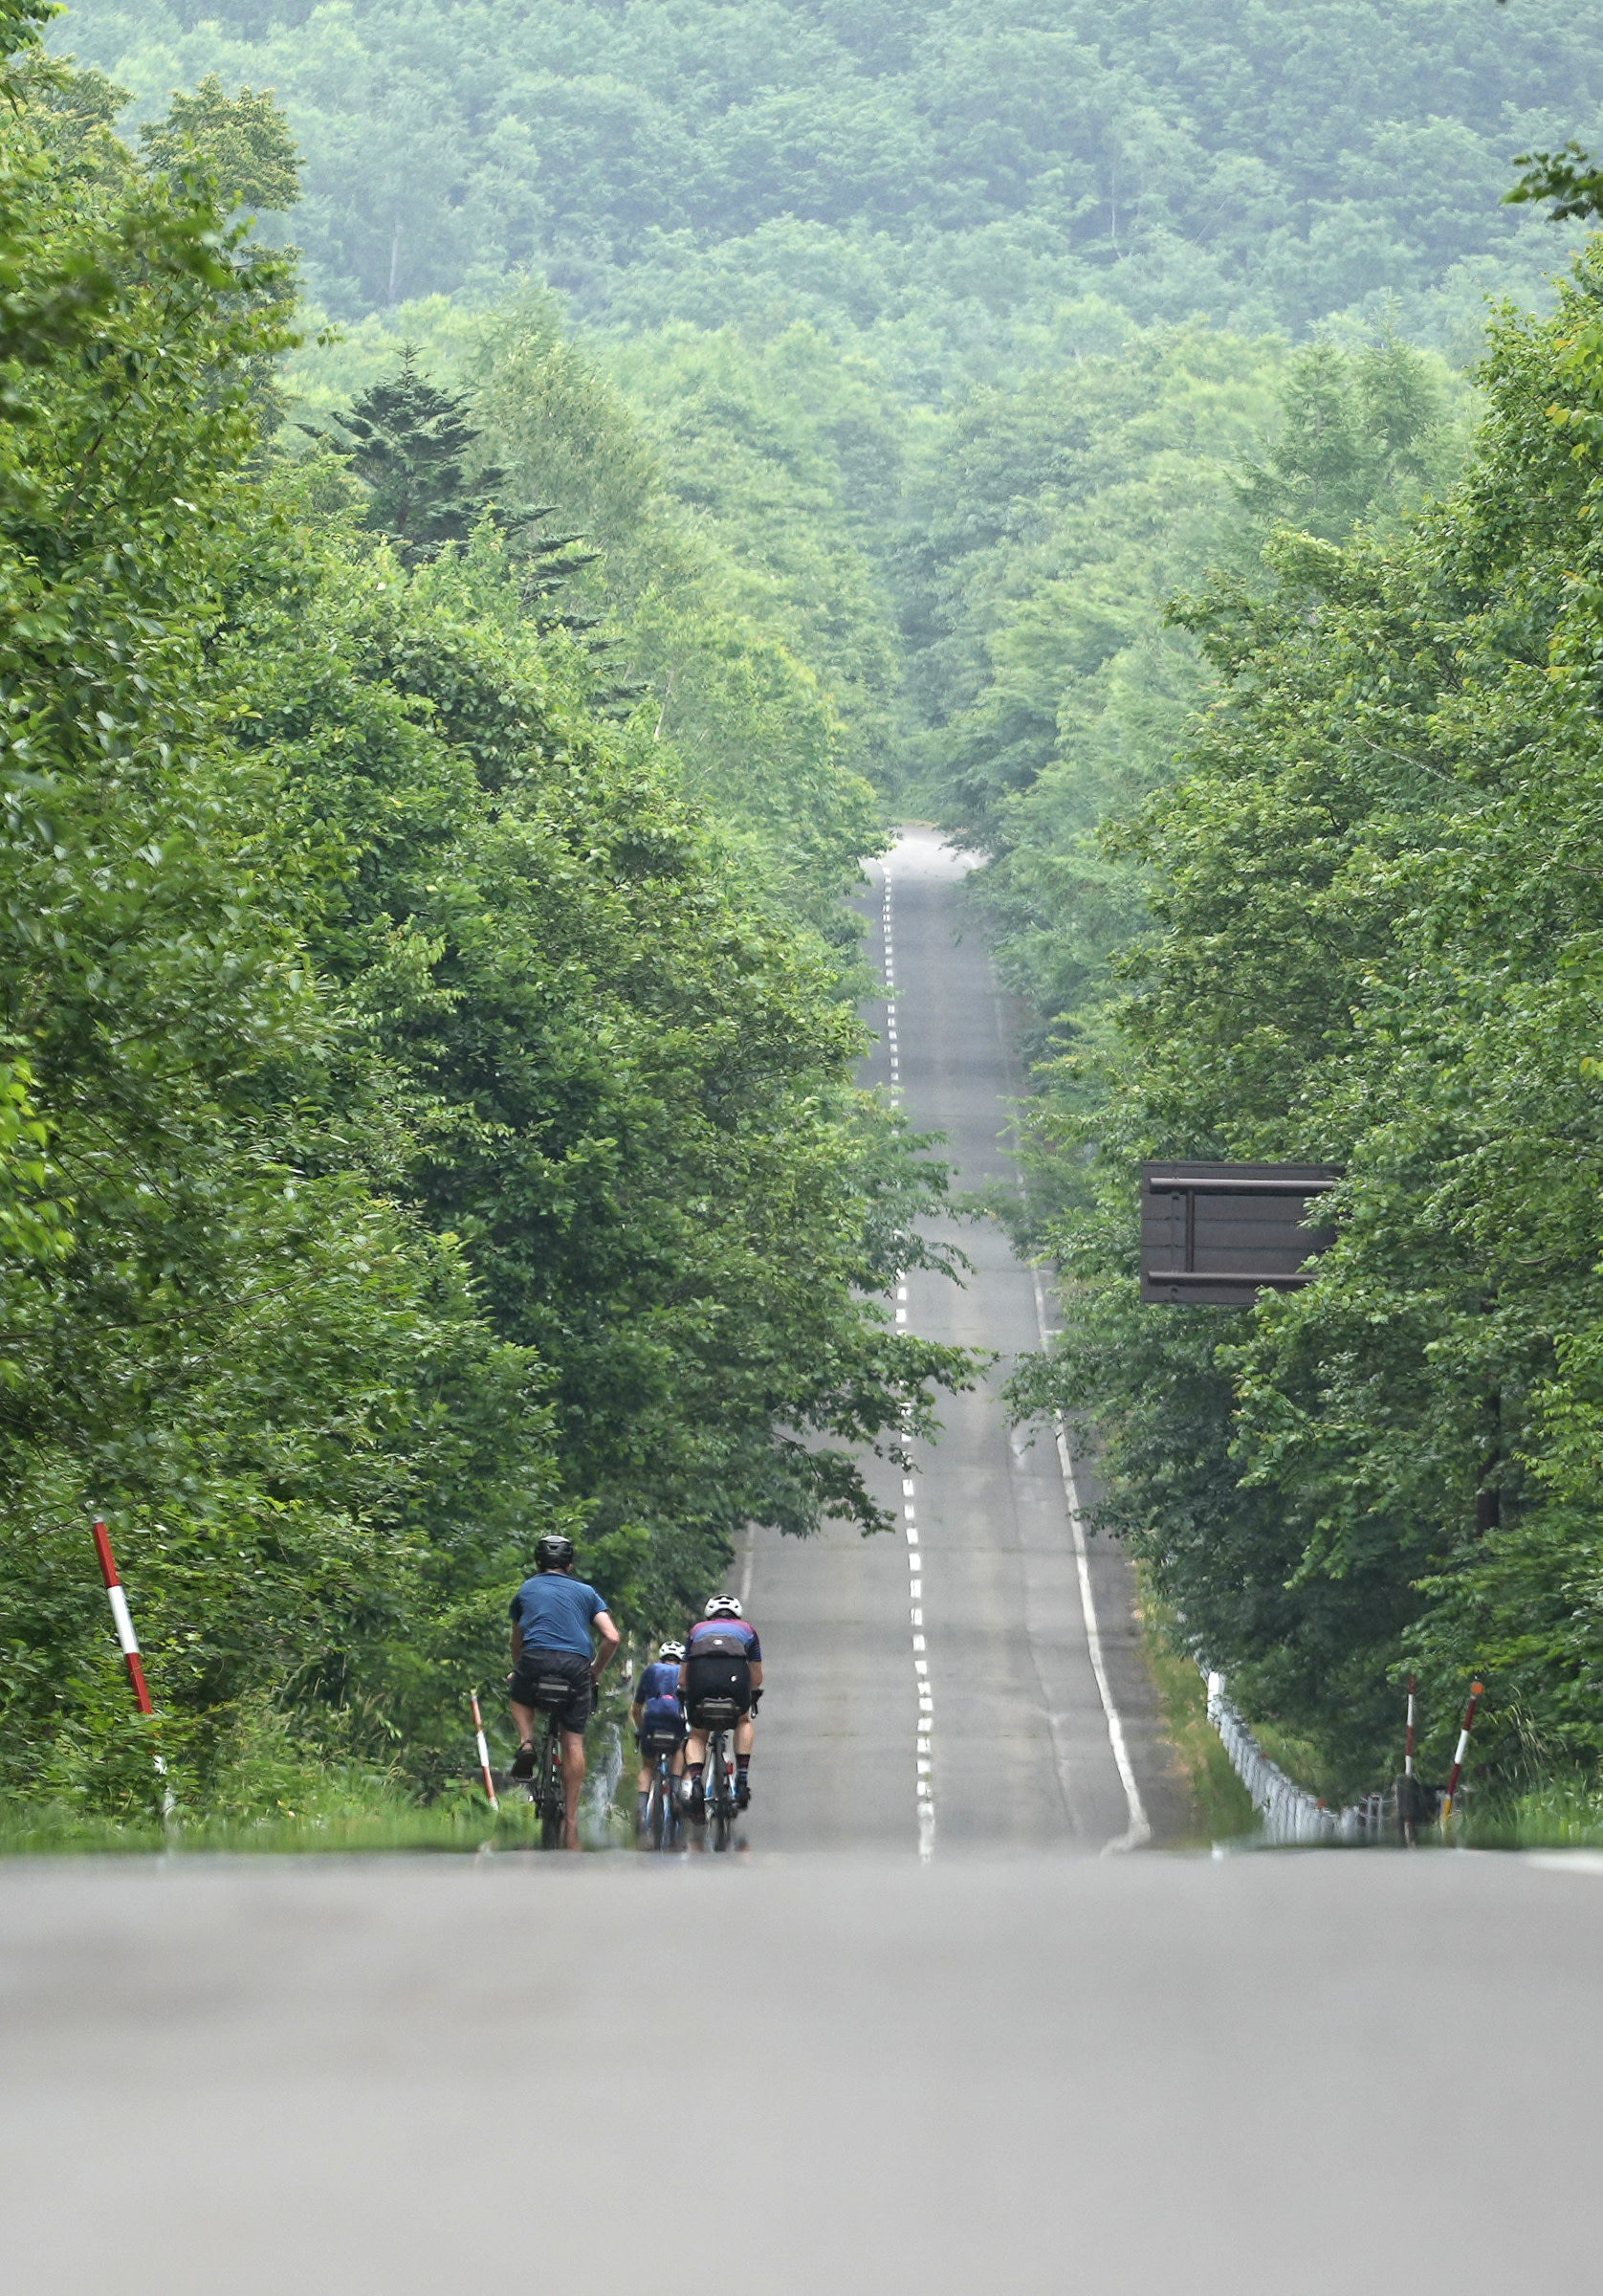 Hokkaido roads are great for cycling!